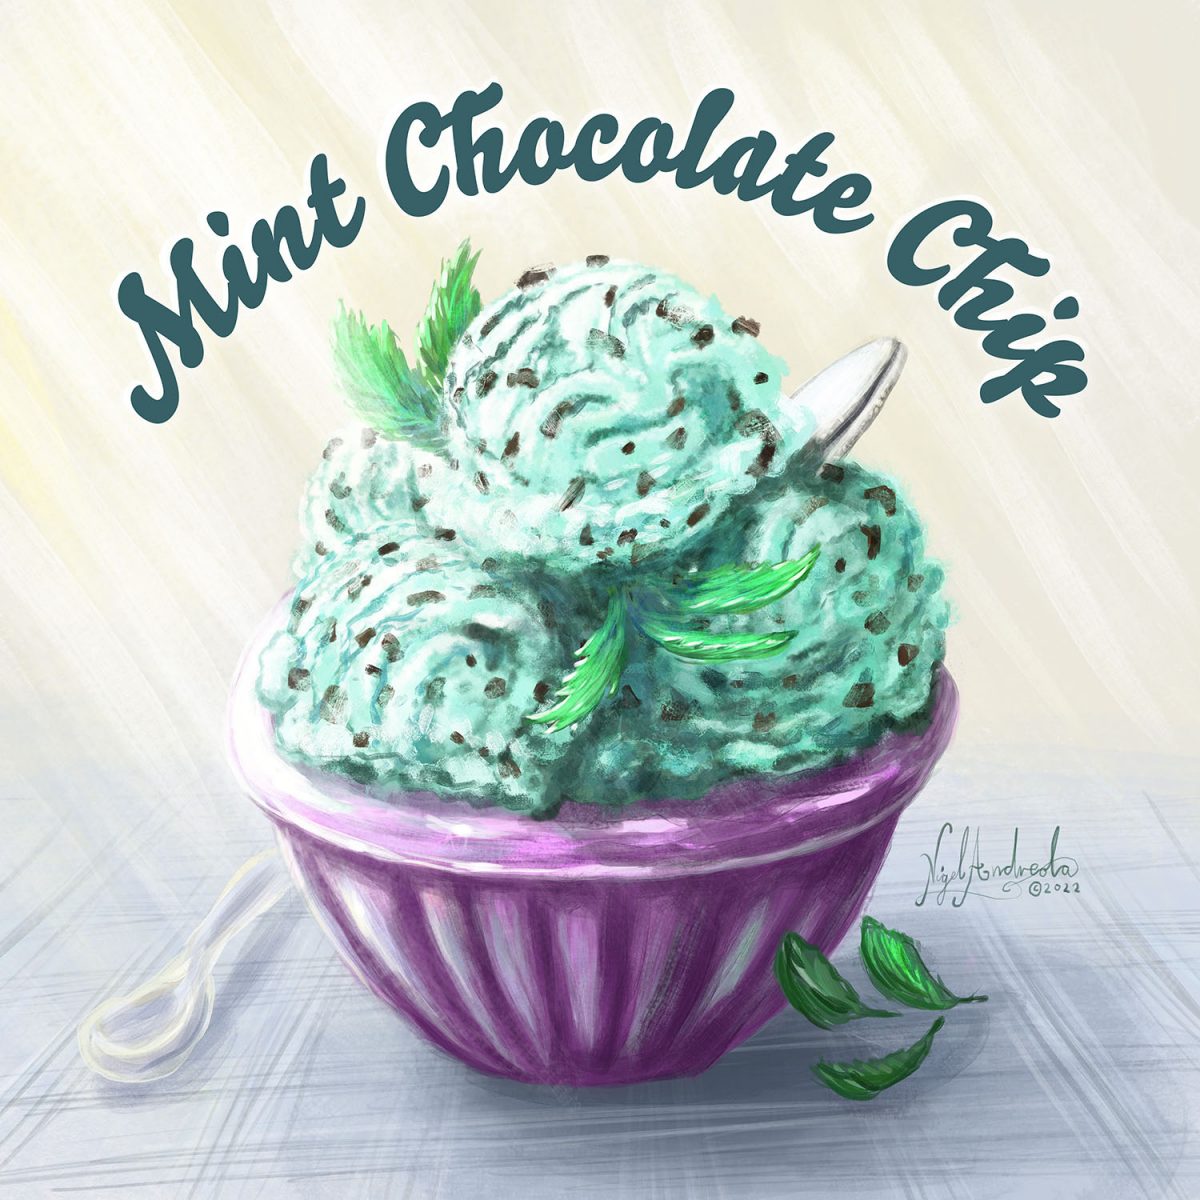 Mint Chocolate Chip by Nigel Andreola